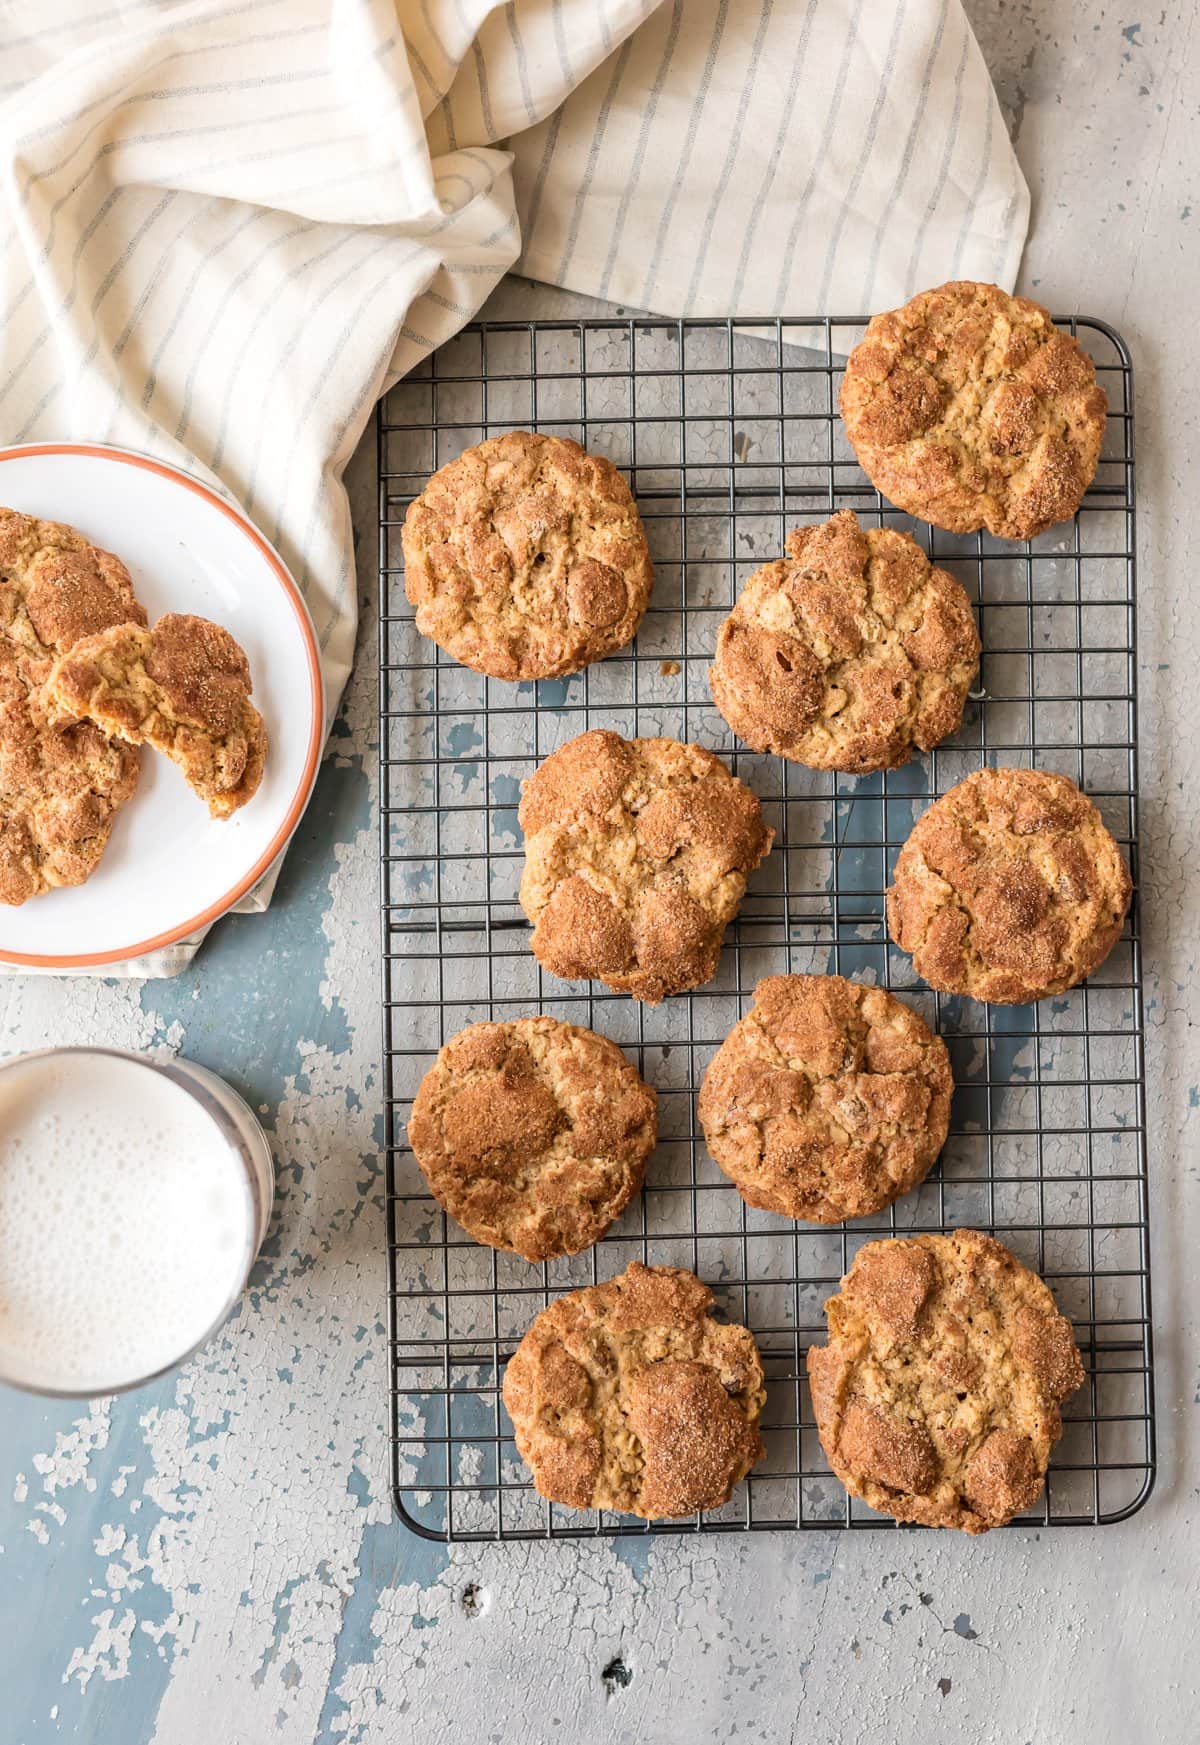 Best oatmeal chocolate chip cookies (oatmeal doozies)